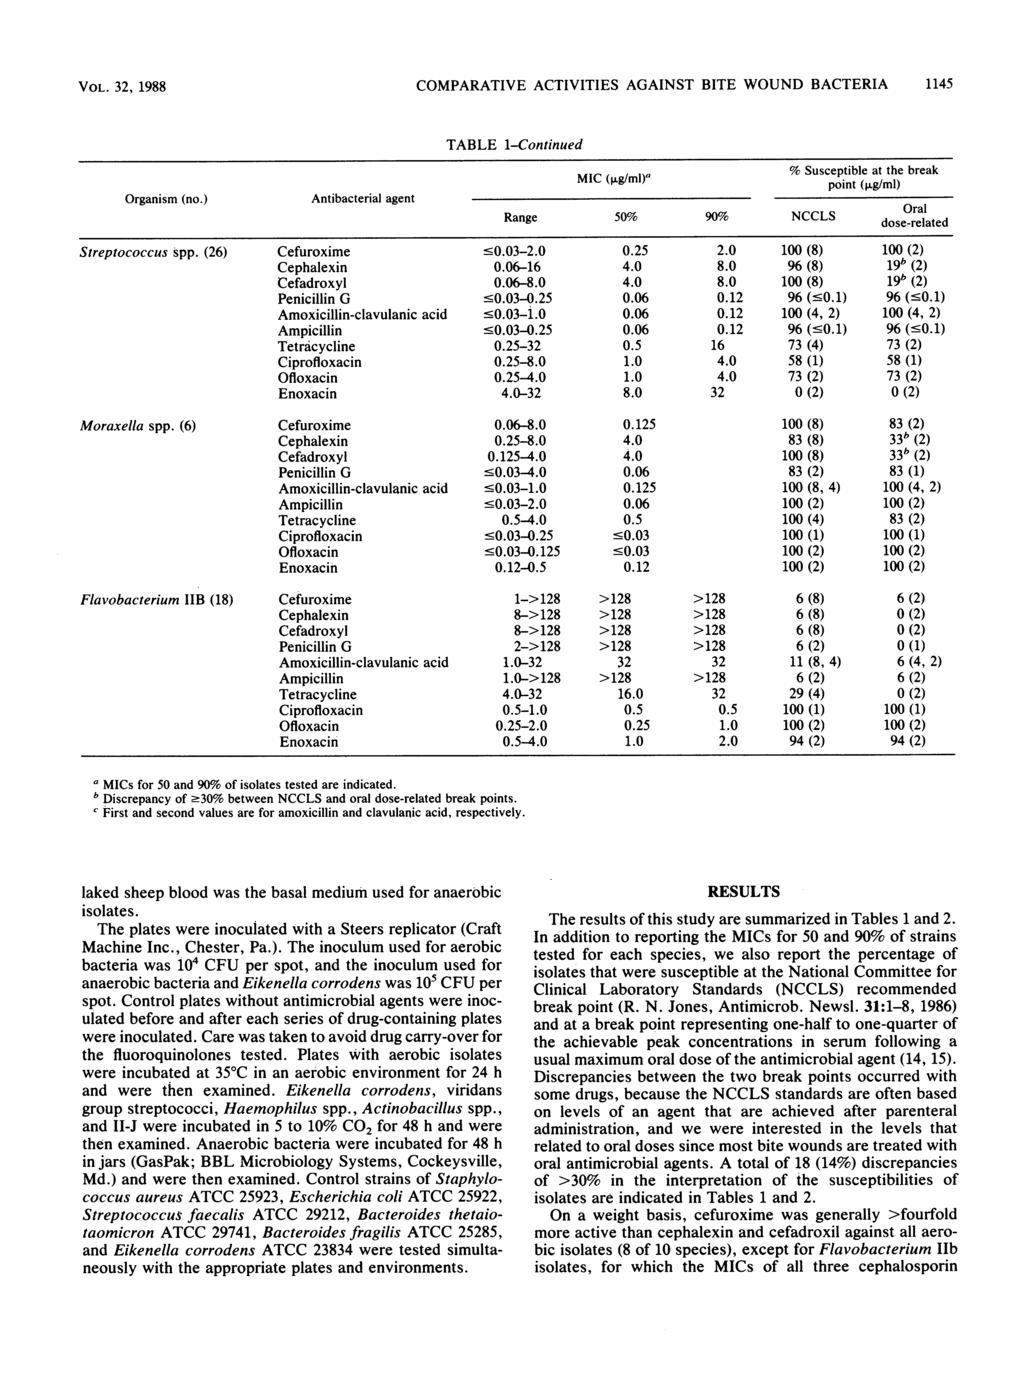 VOL., 1988 COMPARATIVE ACTIVITIES AGAINST BITE WOUND BACTERIA 1145 Organism (no.) Antibacterial agent TABLE 1-Continued MIC MIC (>Lg/ml)' % Susceptible at the break (i...wml)a ~~~~~point (p.